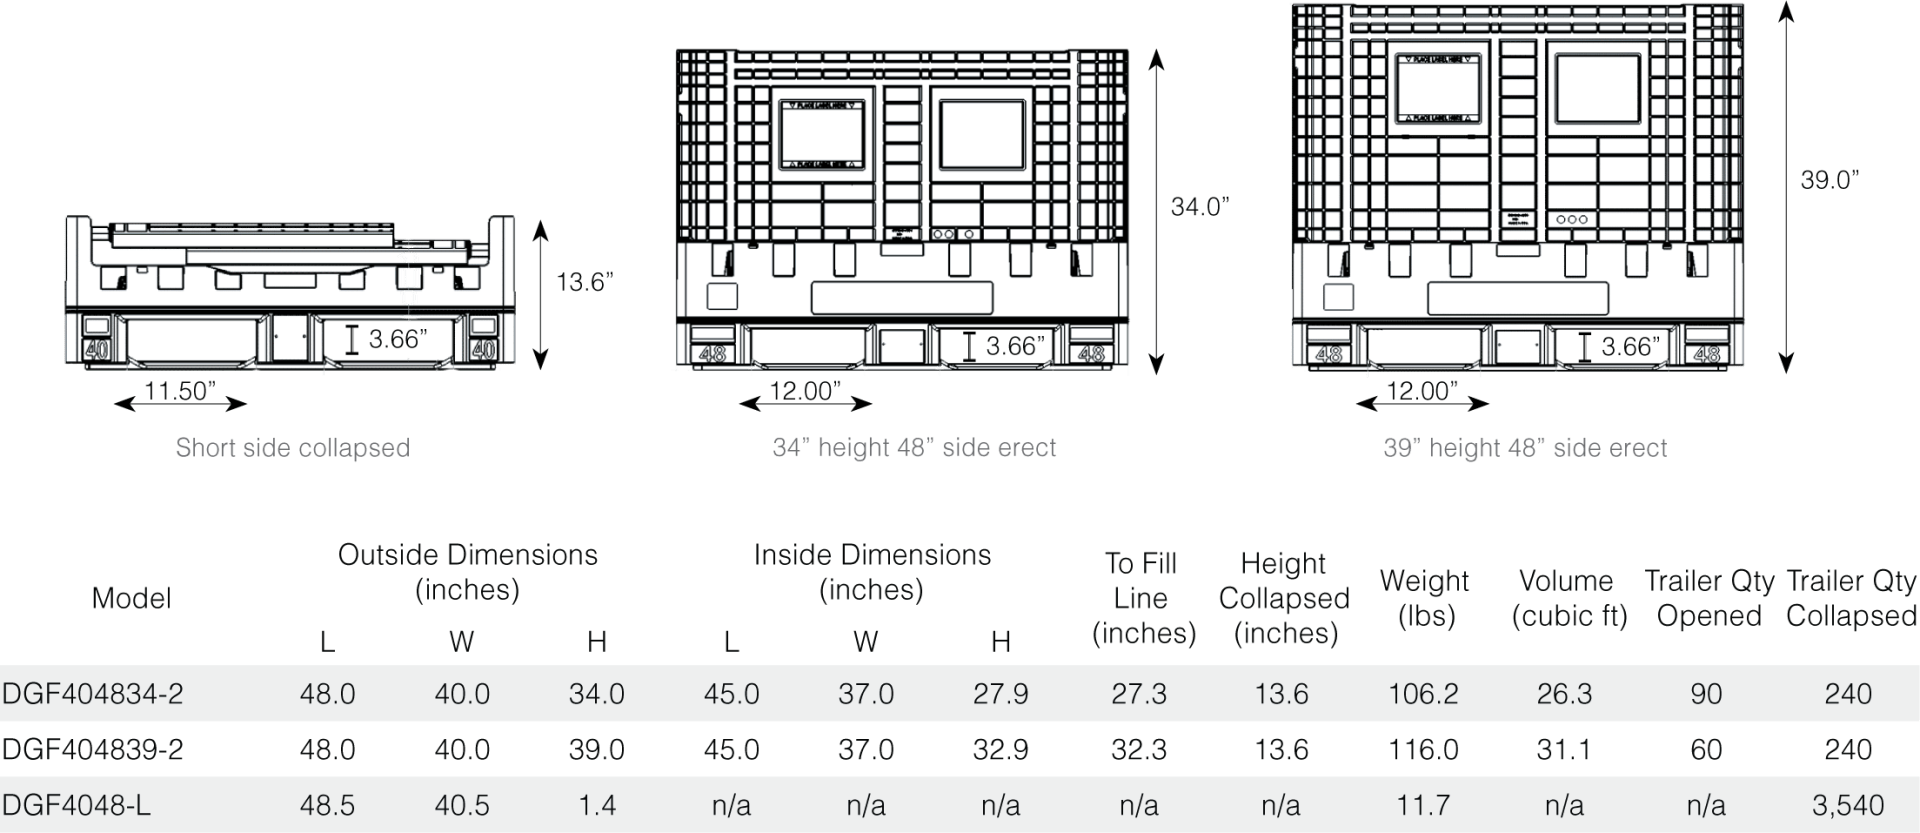 Specs for the 40 x 48 General Purpose Containers